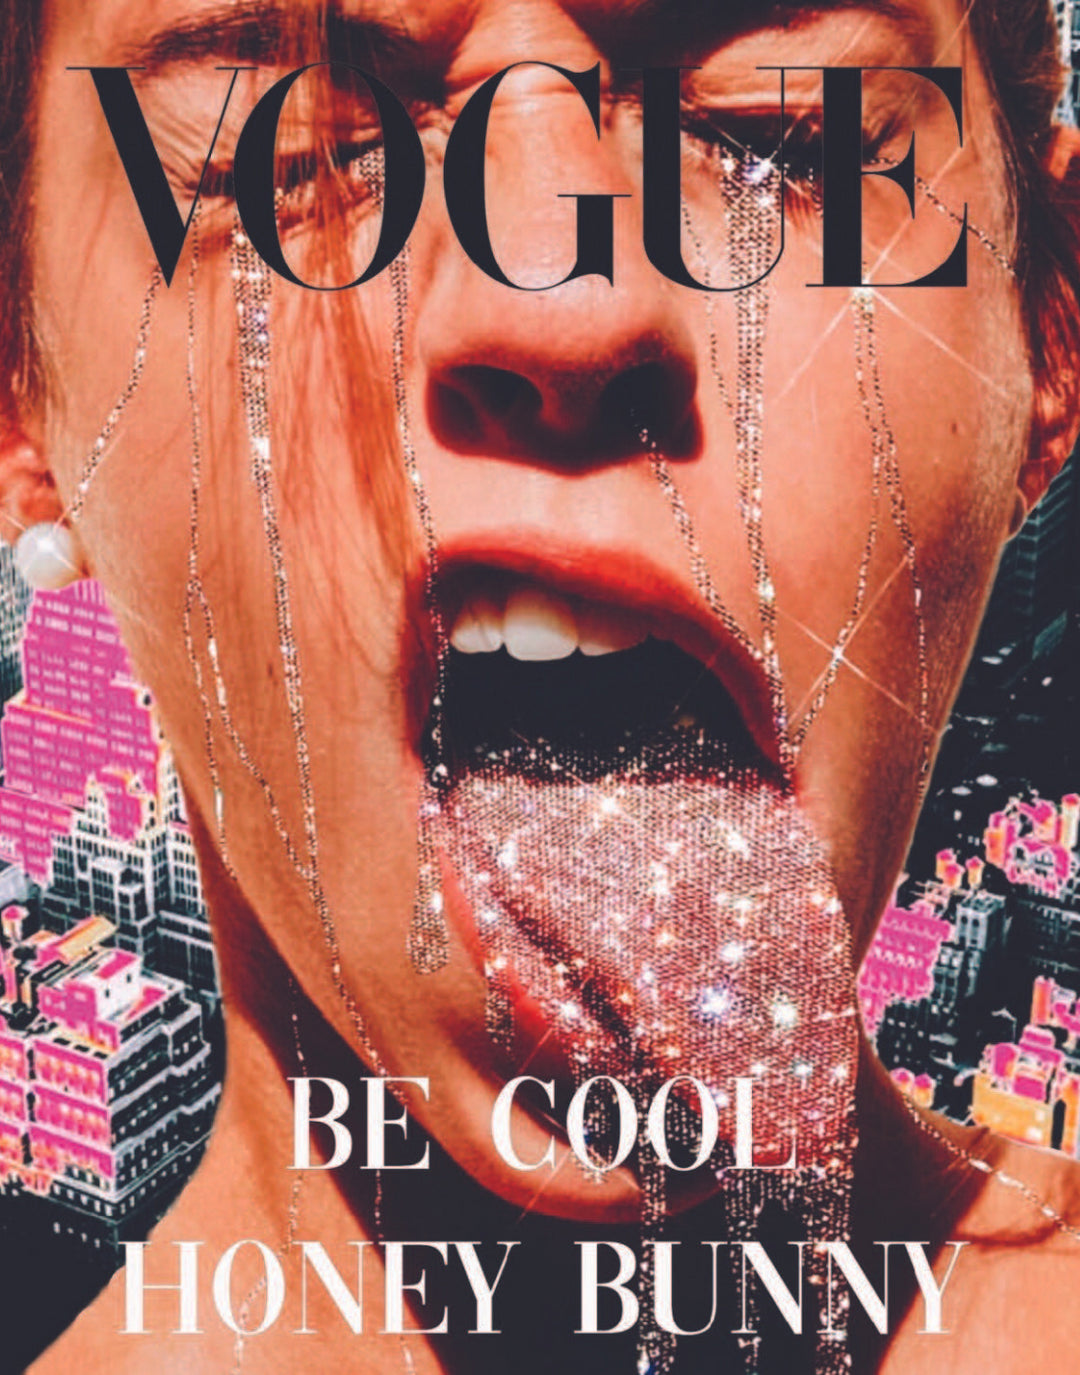 BE COOL VOGUE POSTER - PosterFi